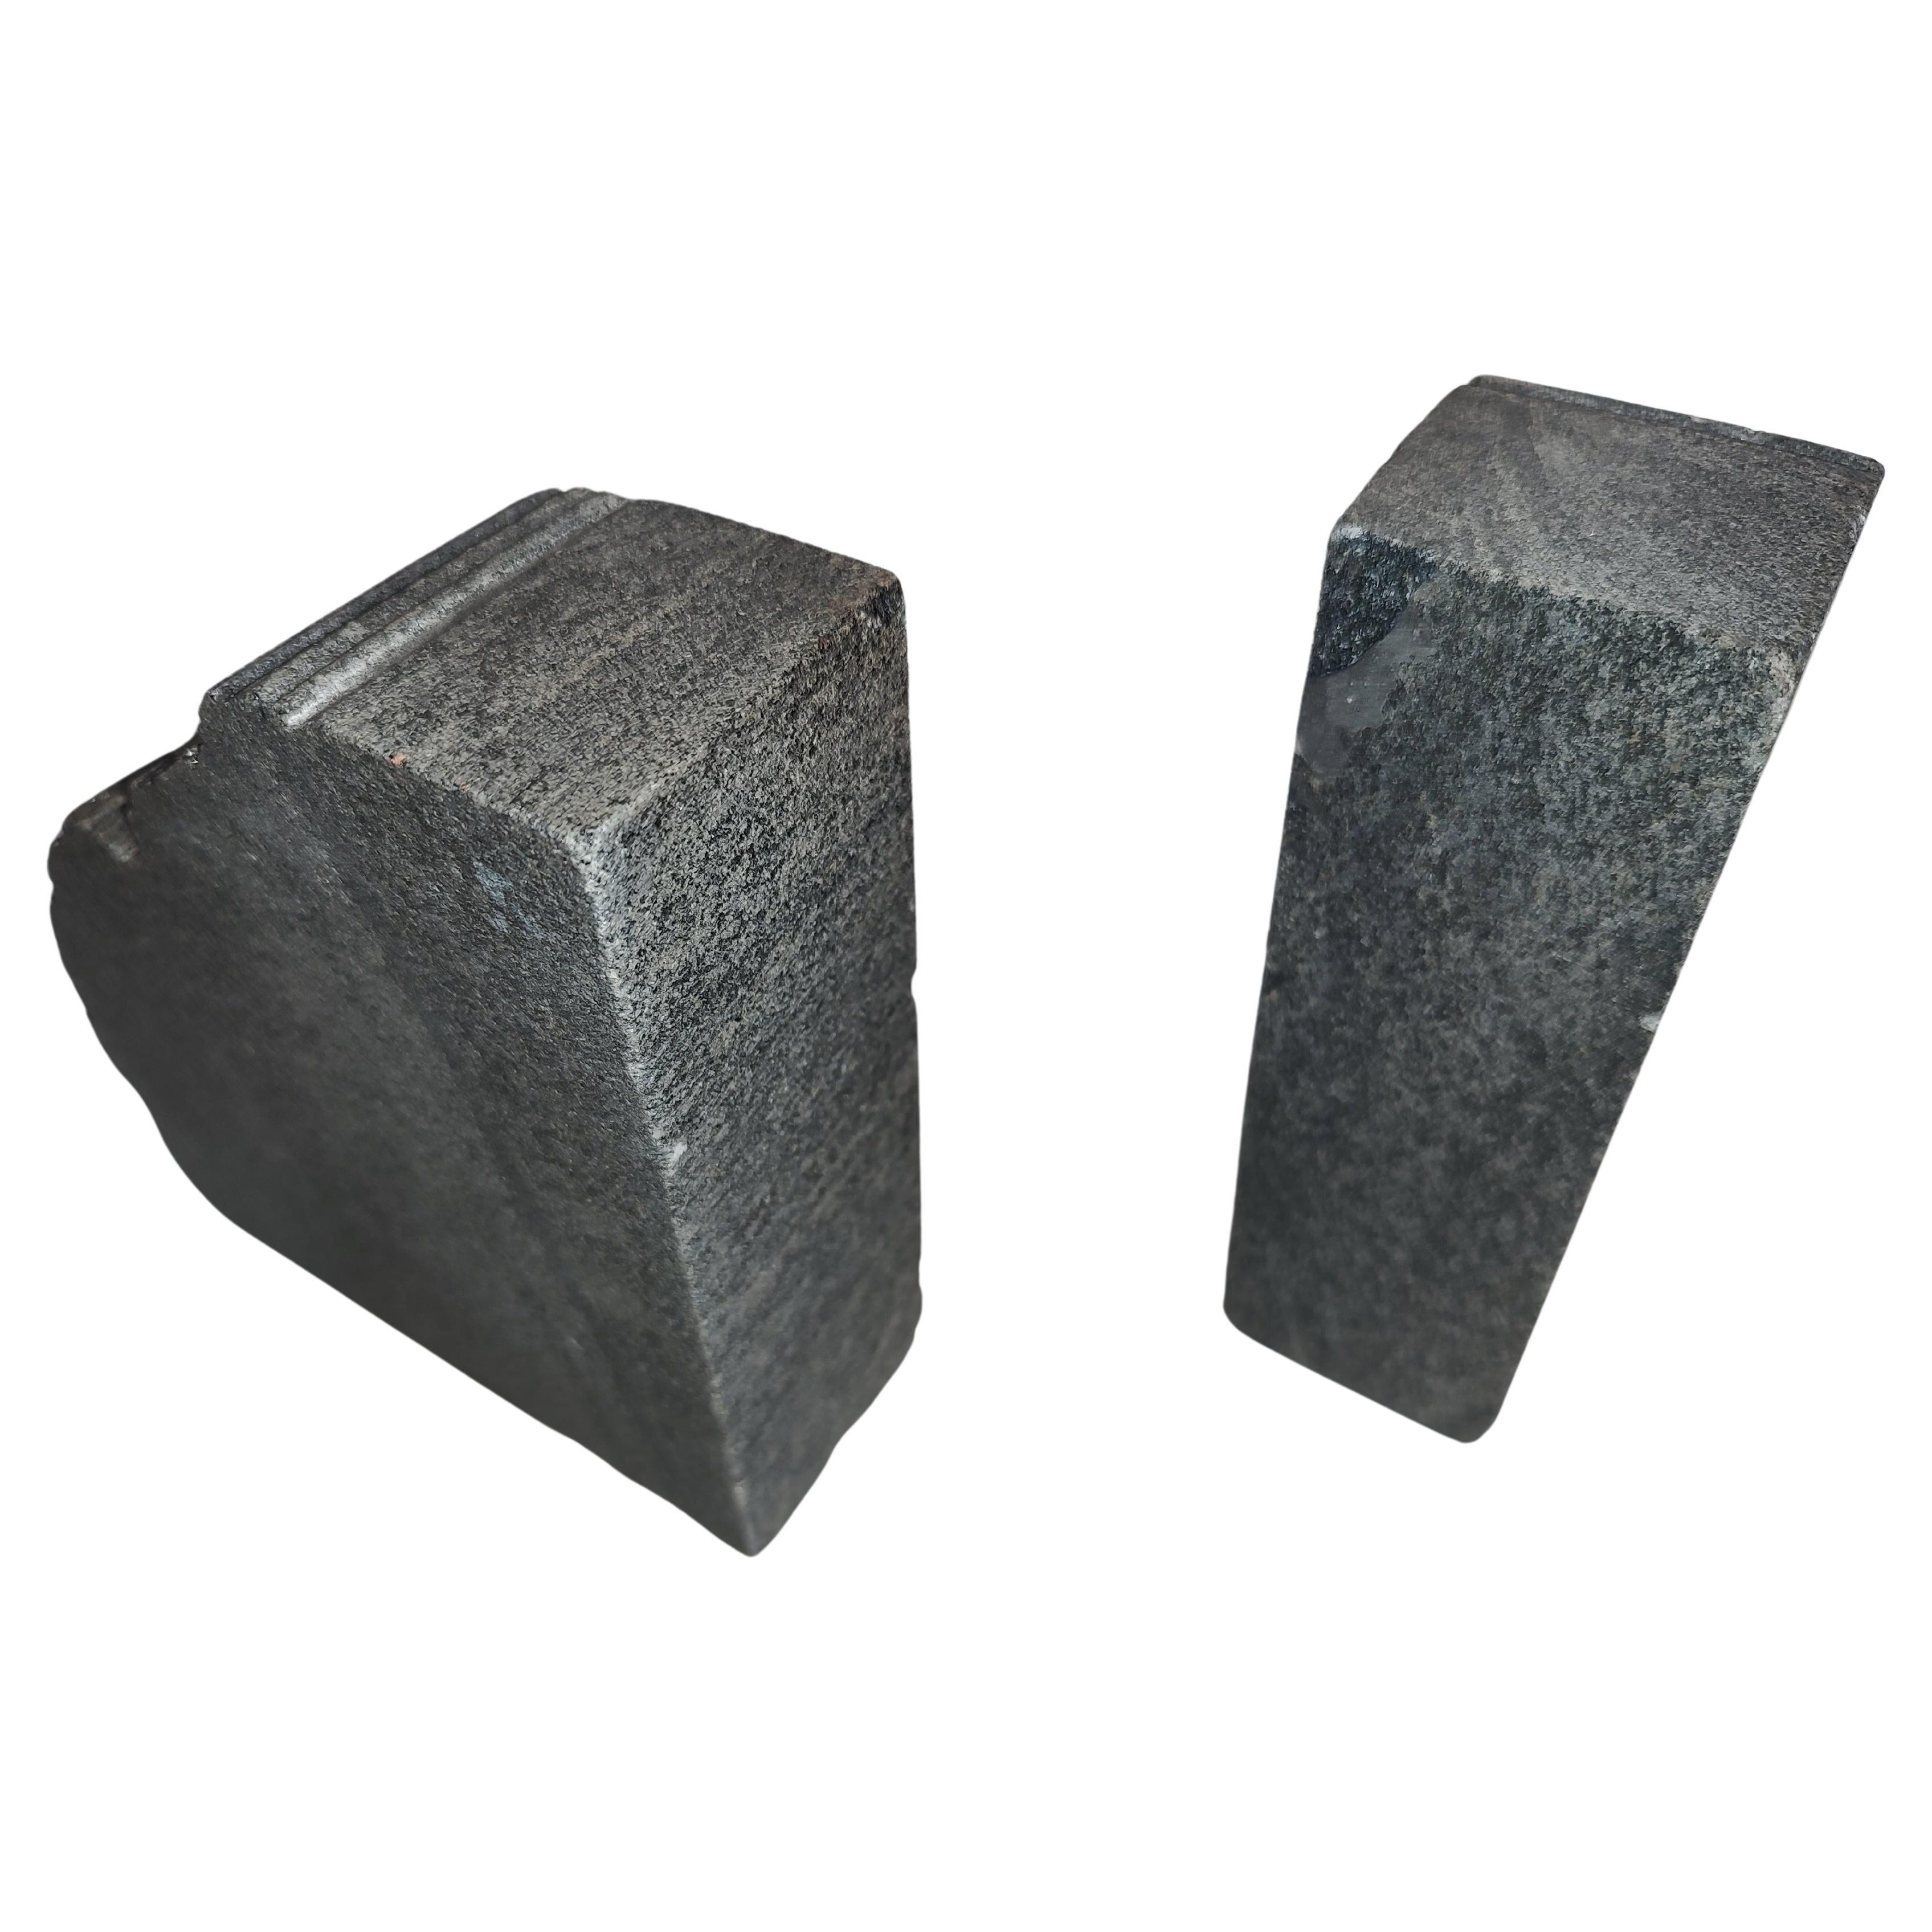 Fabulous hand chisiled pair of gray green granite bookends in a Brutalist style. Very supportive and elegant. In excellent vintage condition.